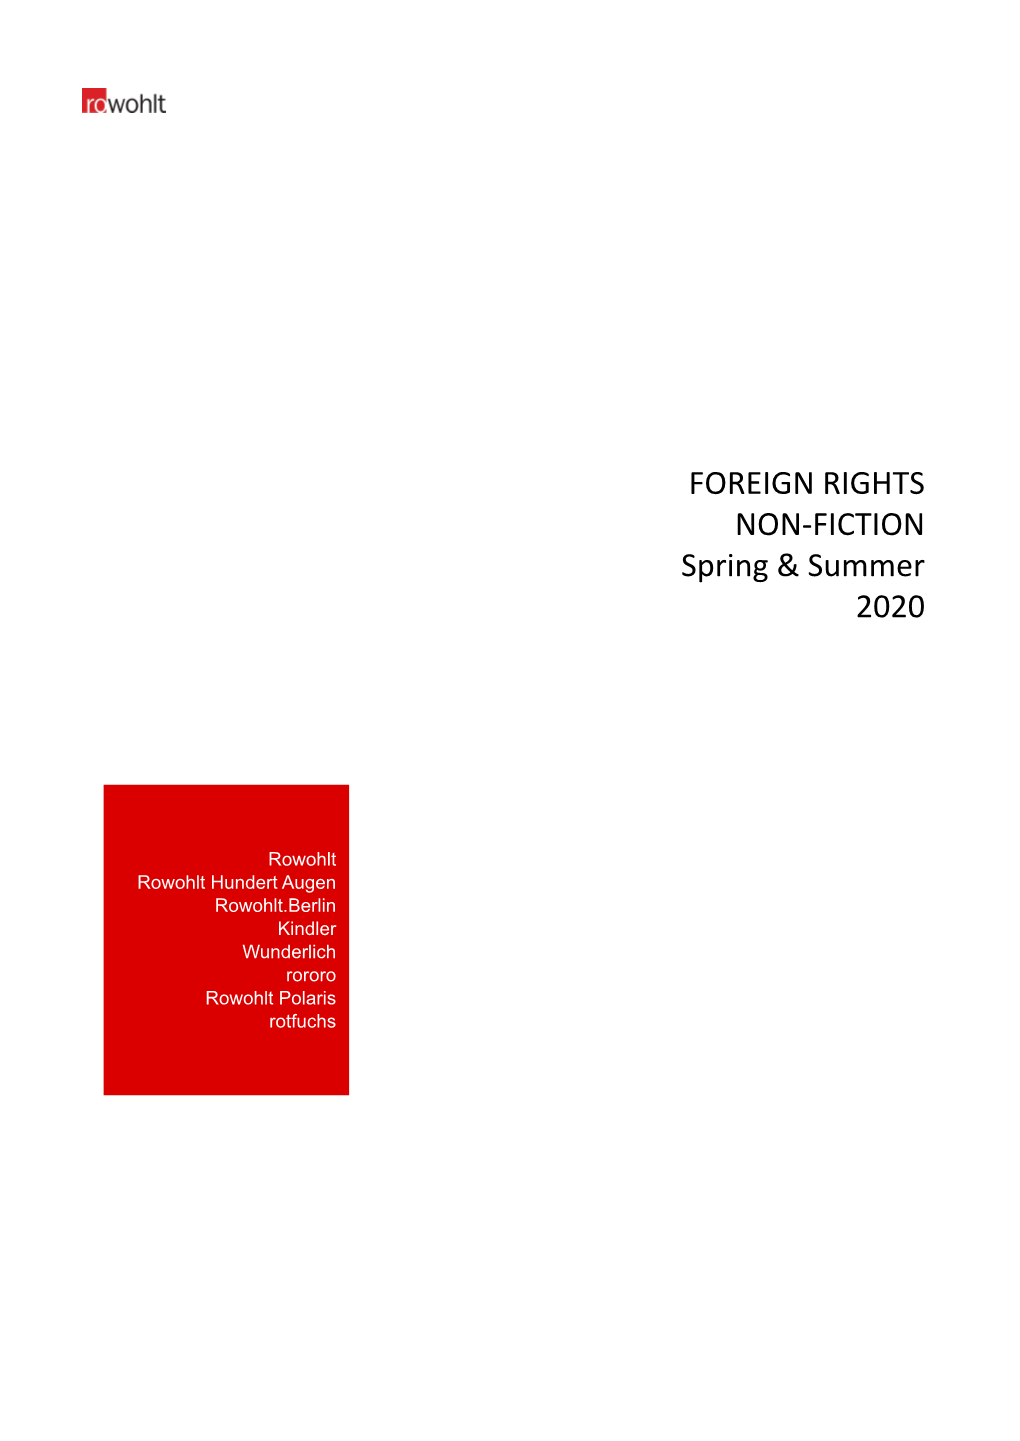 FOREIGN RIGHTS NON-FICTION Spring & Summer 2020